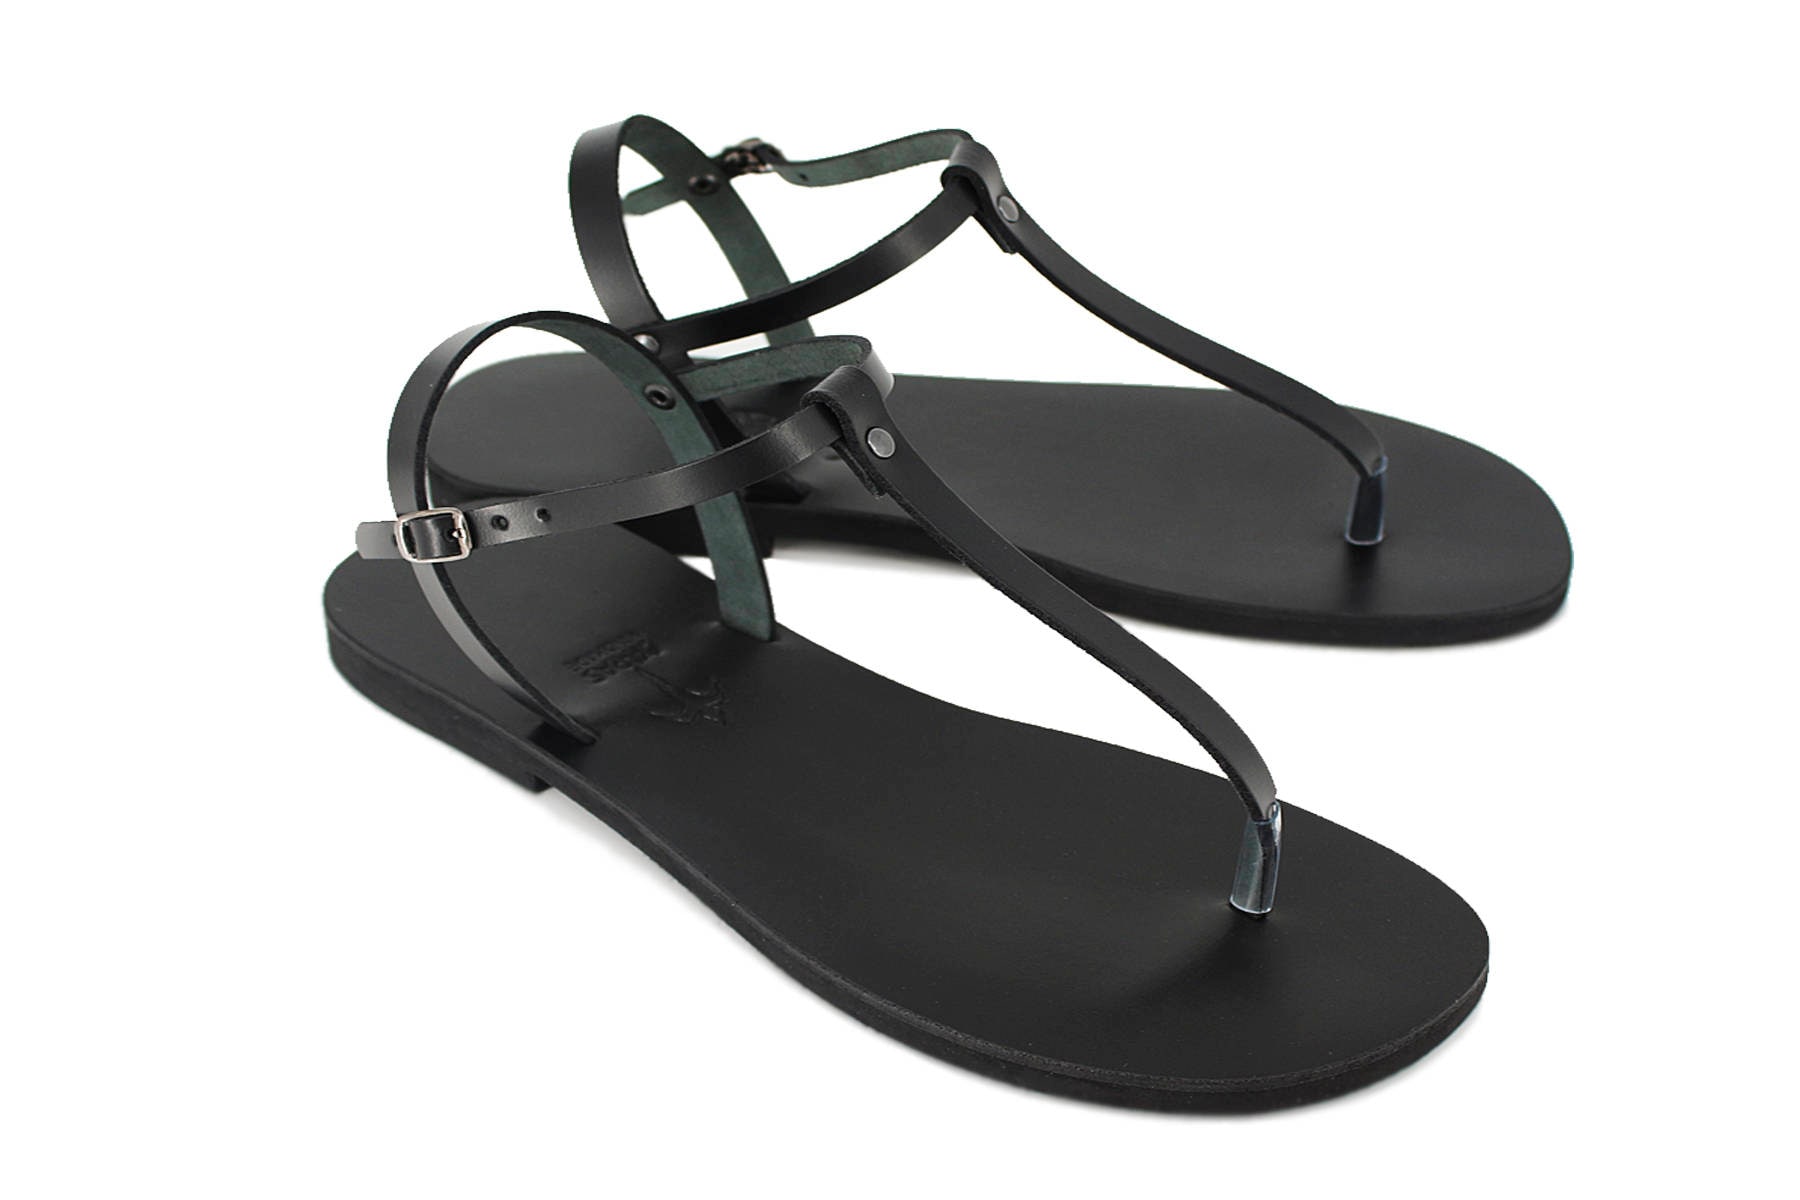 Barefoot Style Leather Thong Sandals T-strap Sandals Unisex